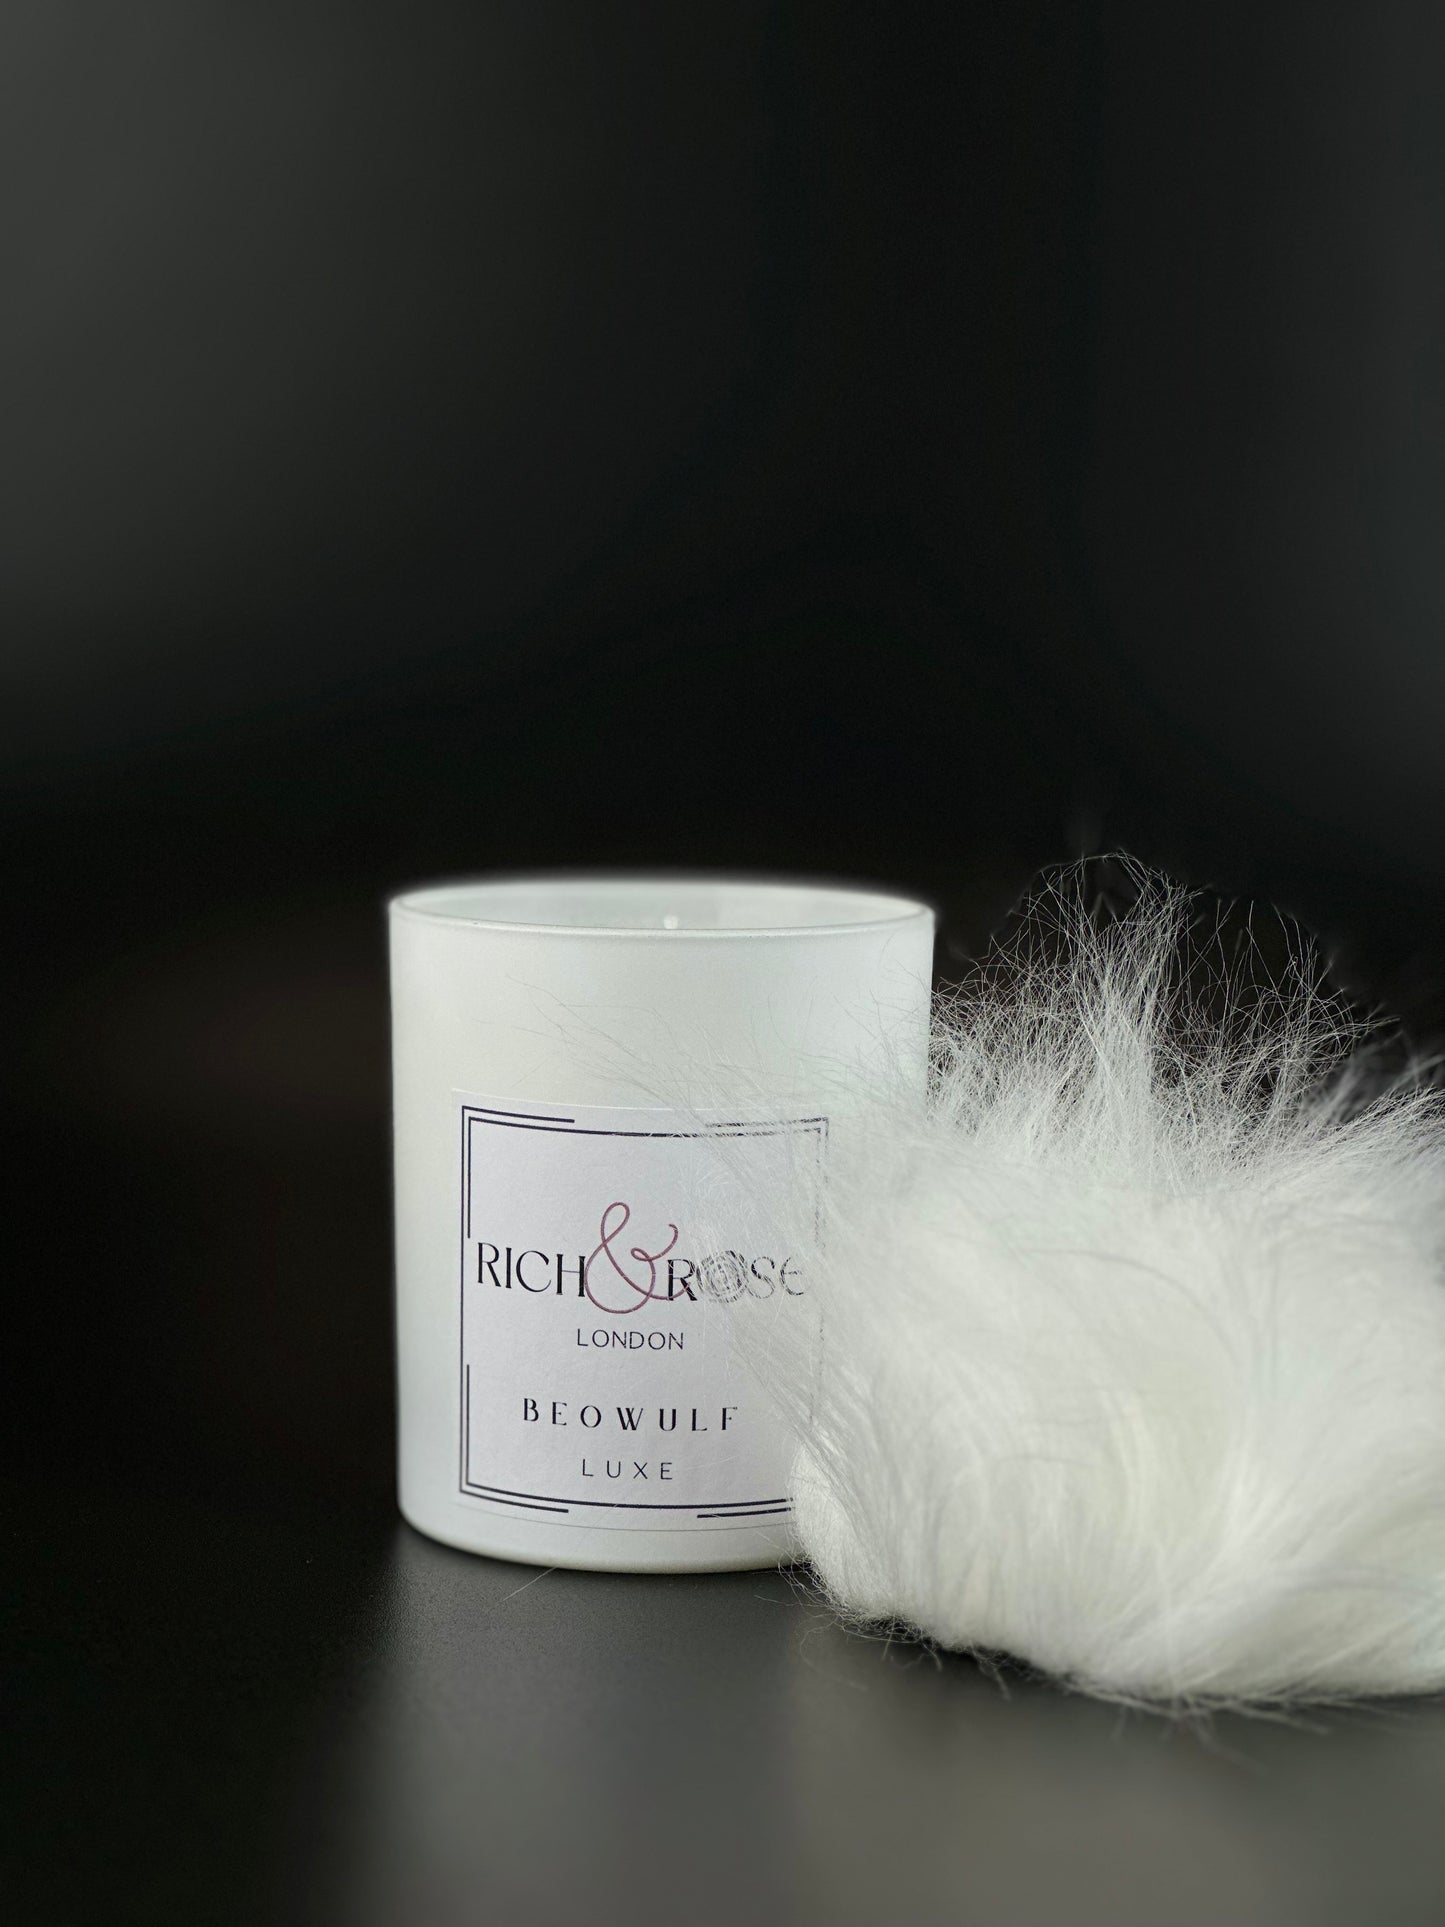 Fluffy gift, faux fur, lion gift, real fur, genuine fur, faux fur , faux fur centre piece, fur interiors, fur decor, faux fur decor, unique gifts for him, unusual gifts, vegan candle, fur gifts, faux fur gift, unique gifts for her ,wolf candle , Beowulf fur, white wolf, fluffy decor, fluffy candle, fluffy interiors.luxury London, London gifts, faux fur gifts, handmade luxury,